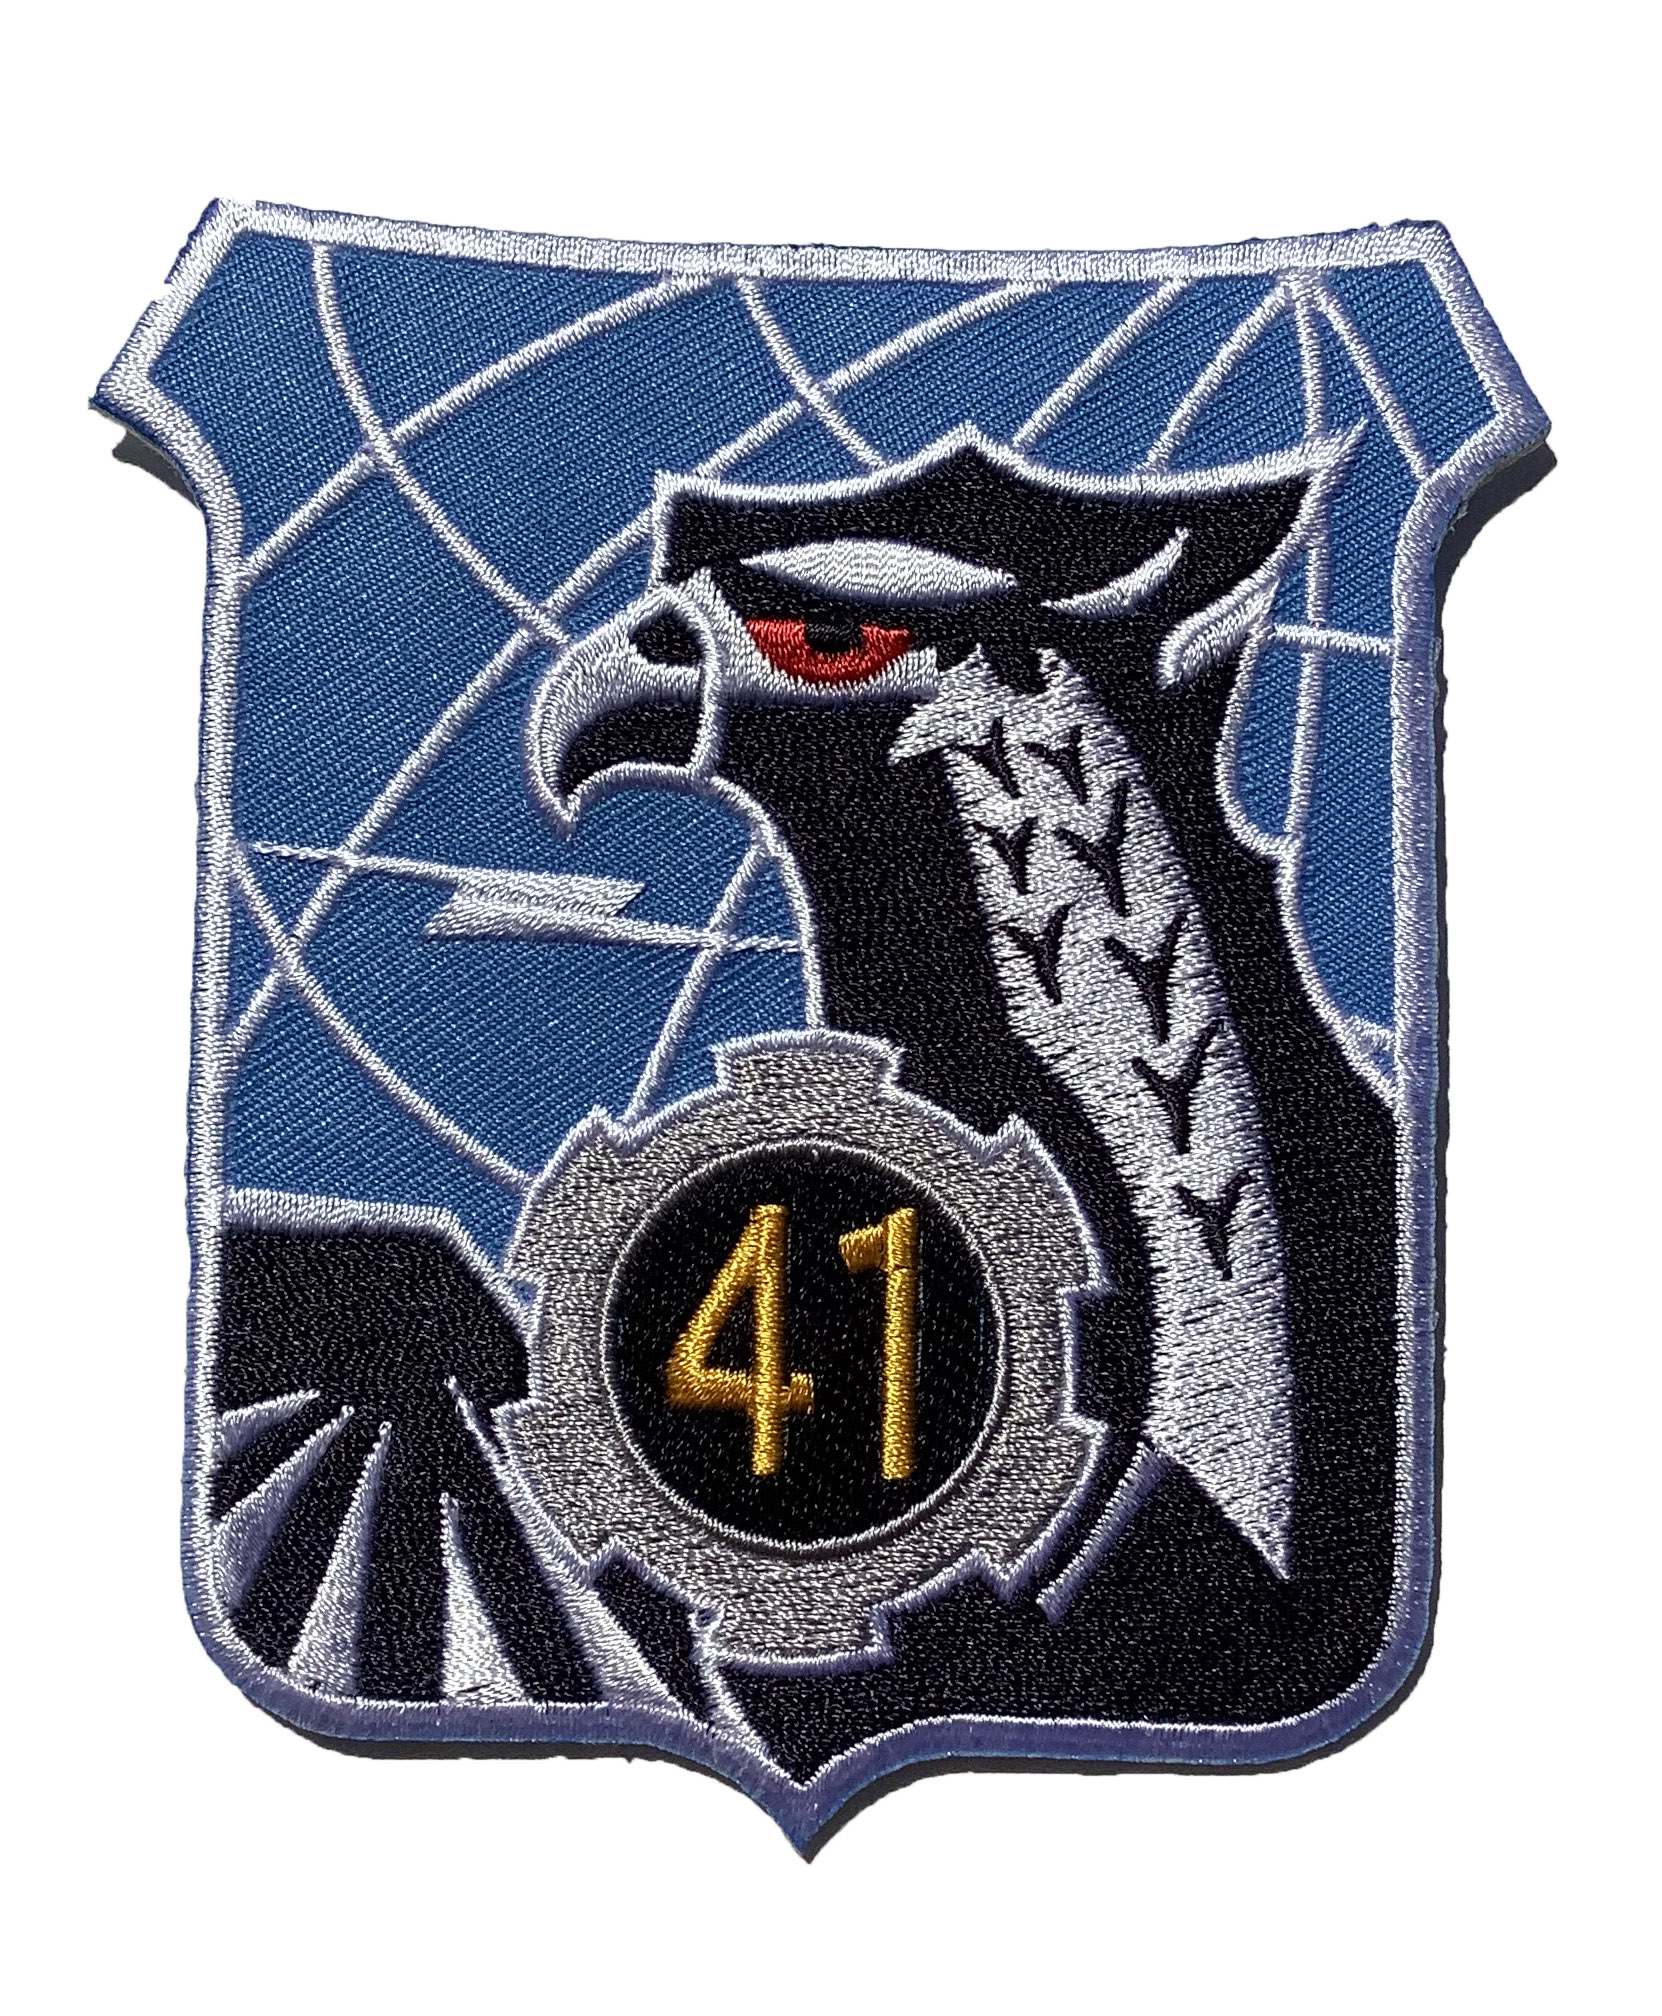 Republic of Vietnam Air Force 41st Tactical Wing Patch